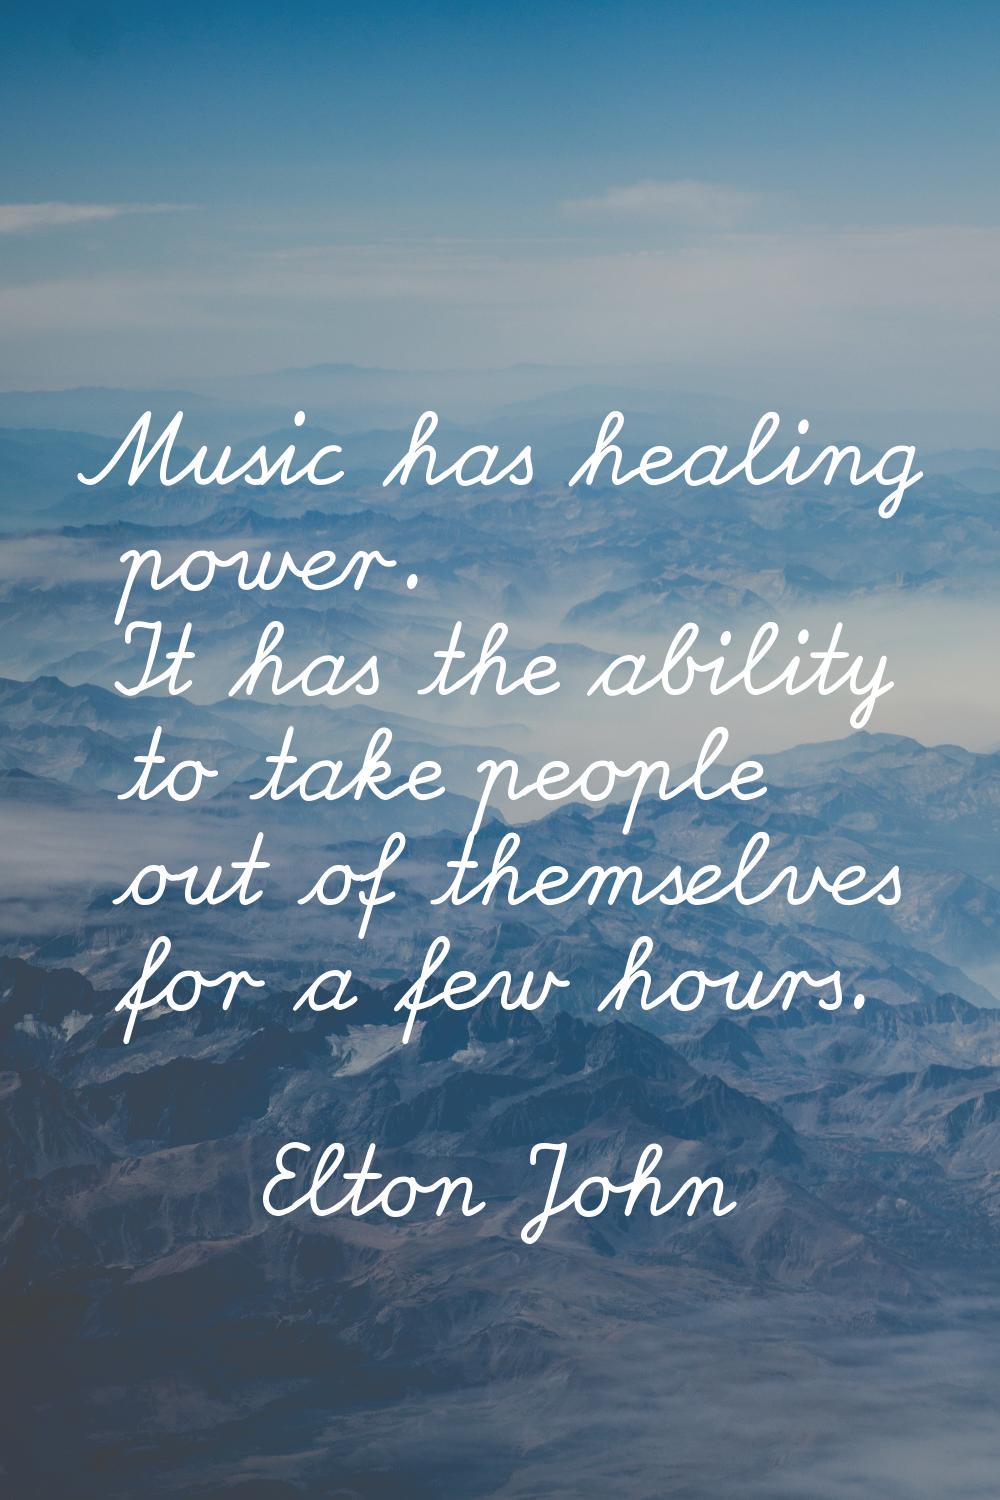 Music has healing power. It has the ability to take people out of themselves for a few hours.